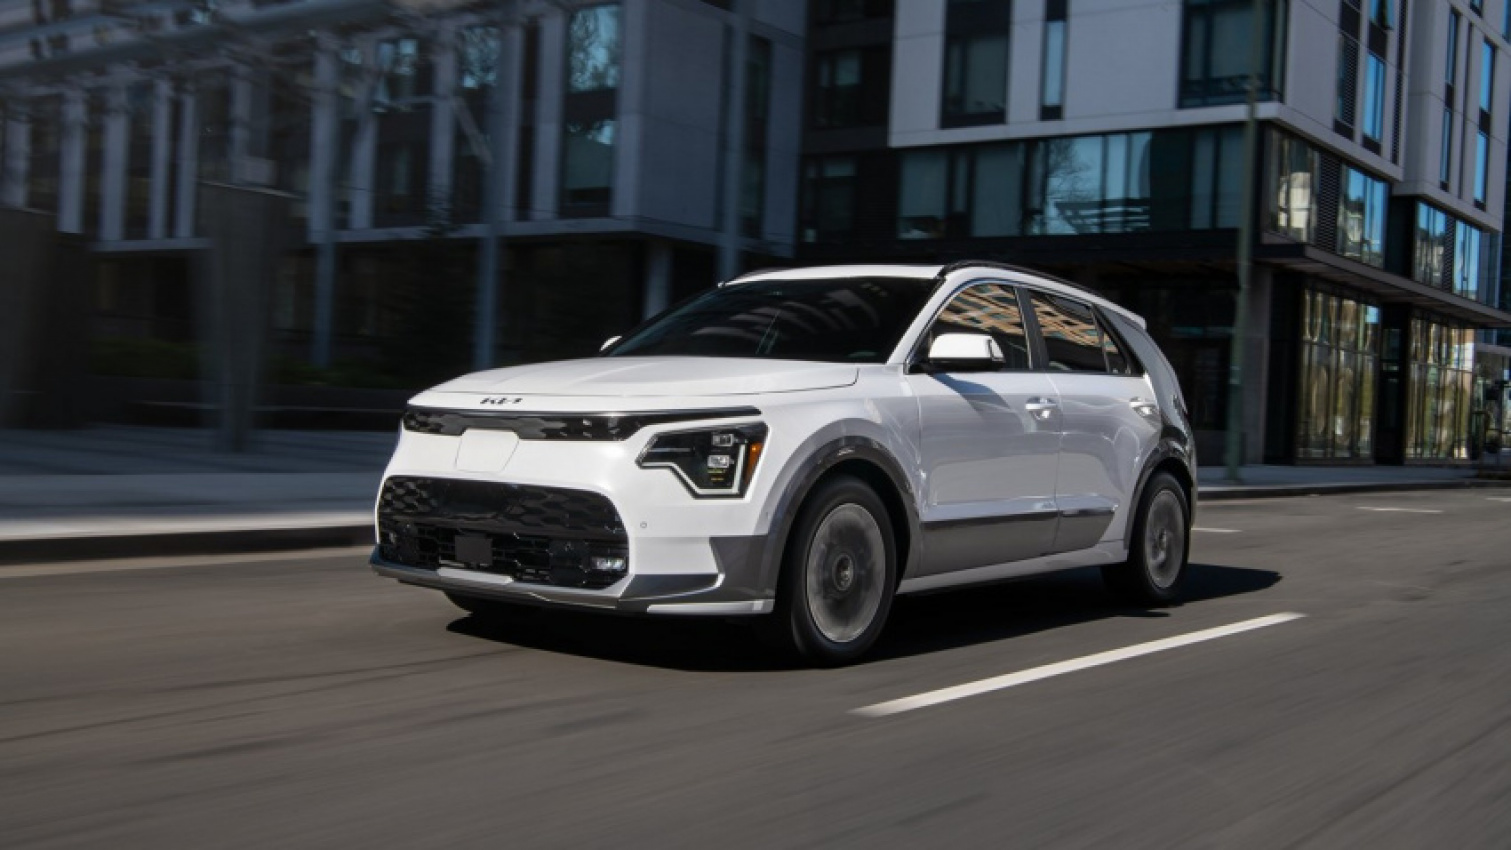 cars, hybrid cars, kia, android, electric cars, hybrids, kia news, plug-in hybrids, android, kia reveals redesigned 2023 niro ev, hybrid, and plug-in hybrid